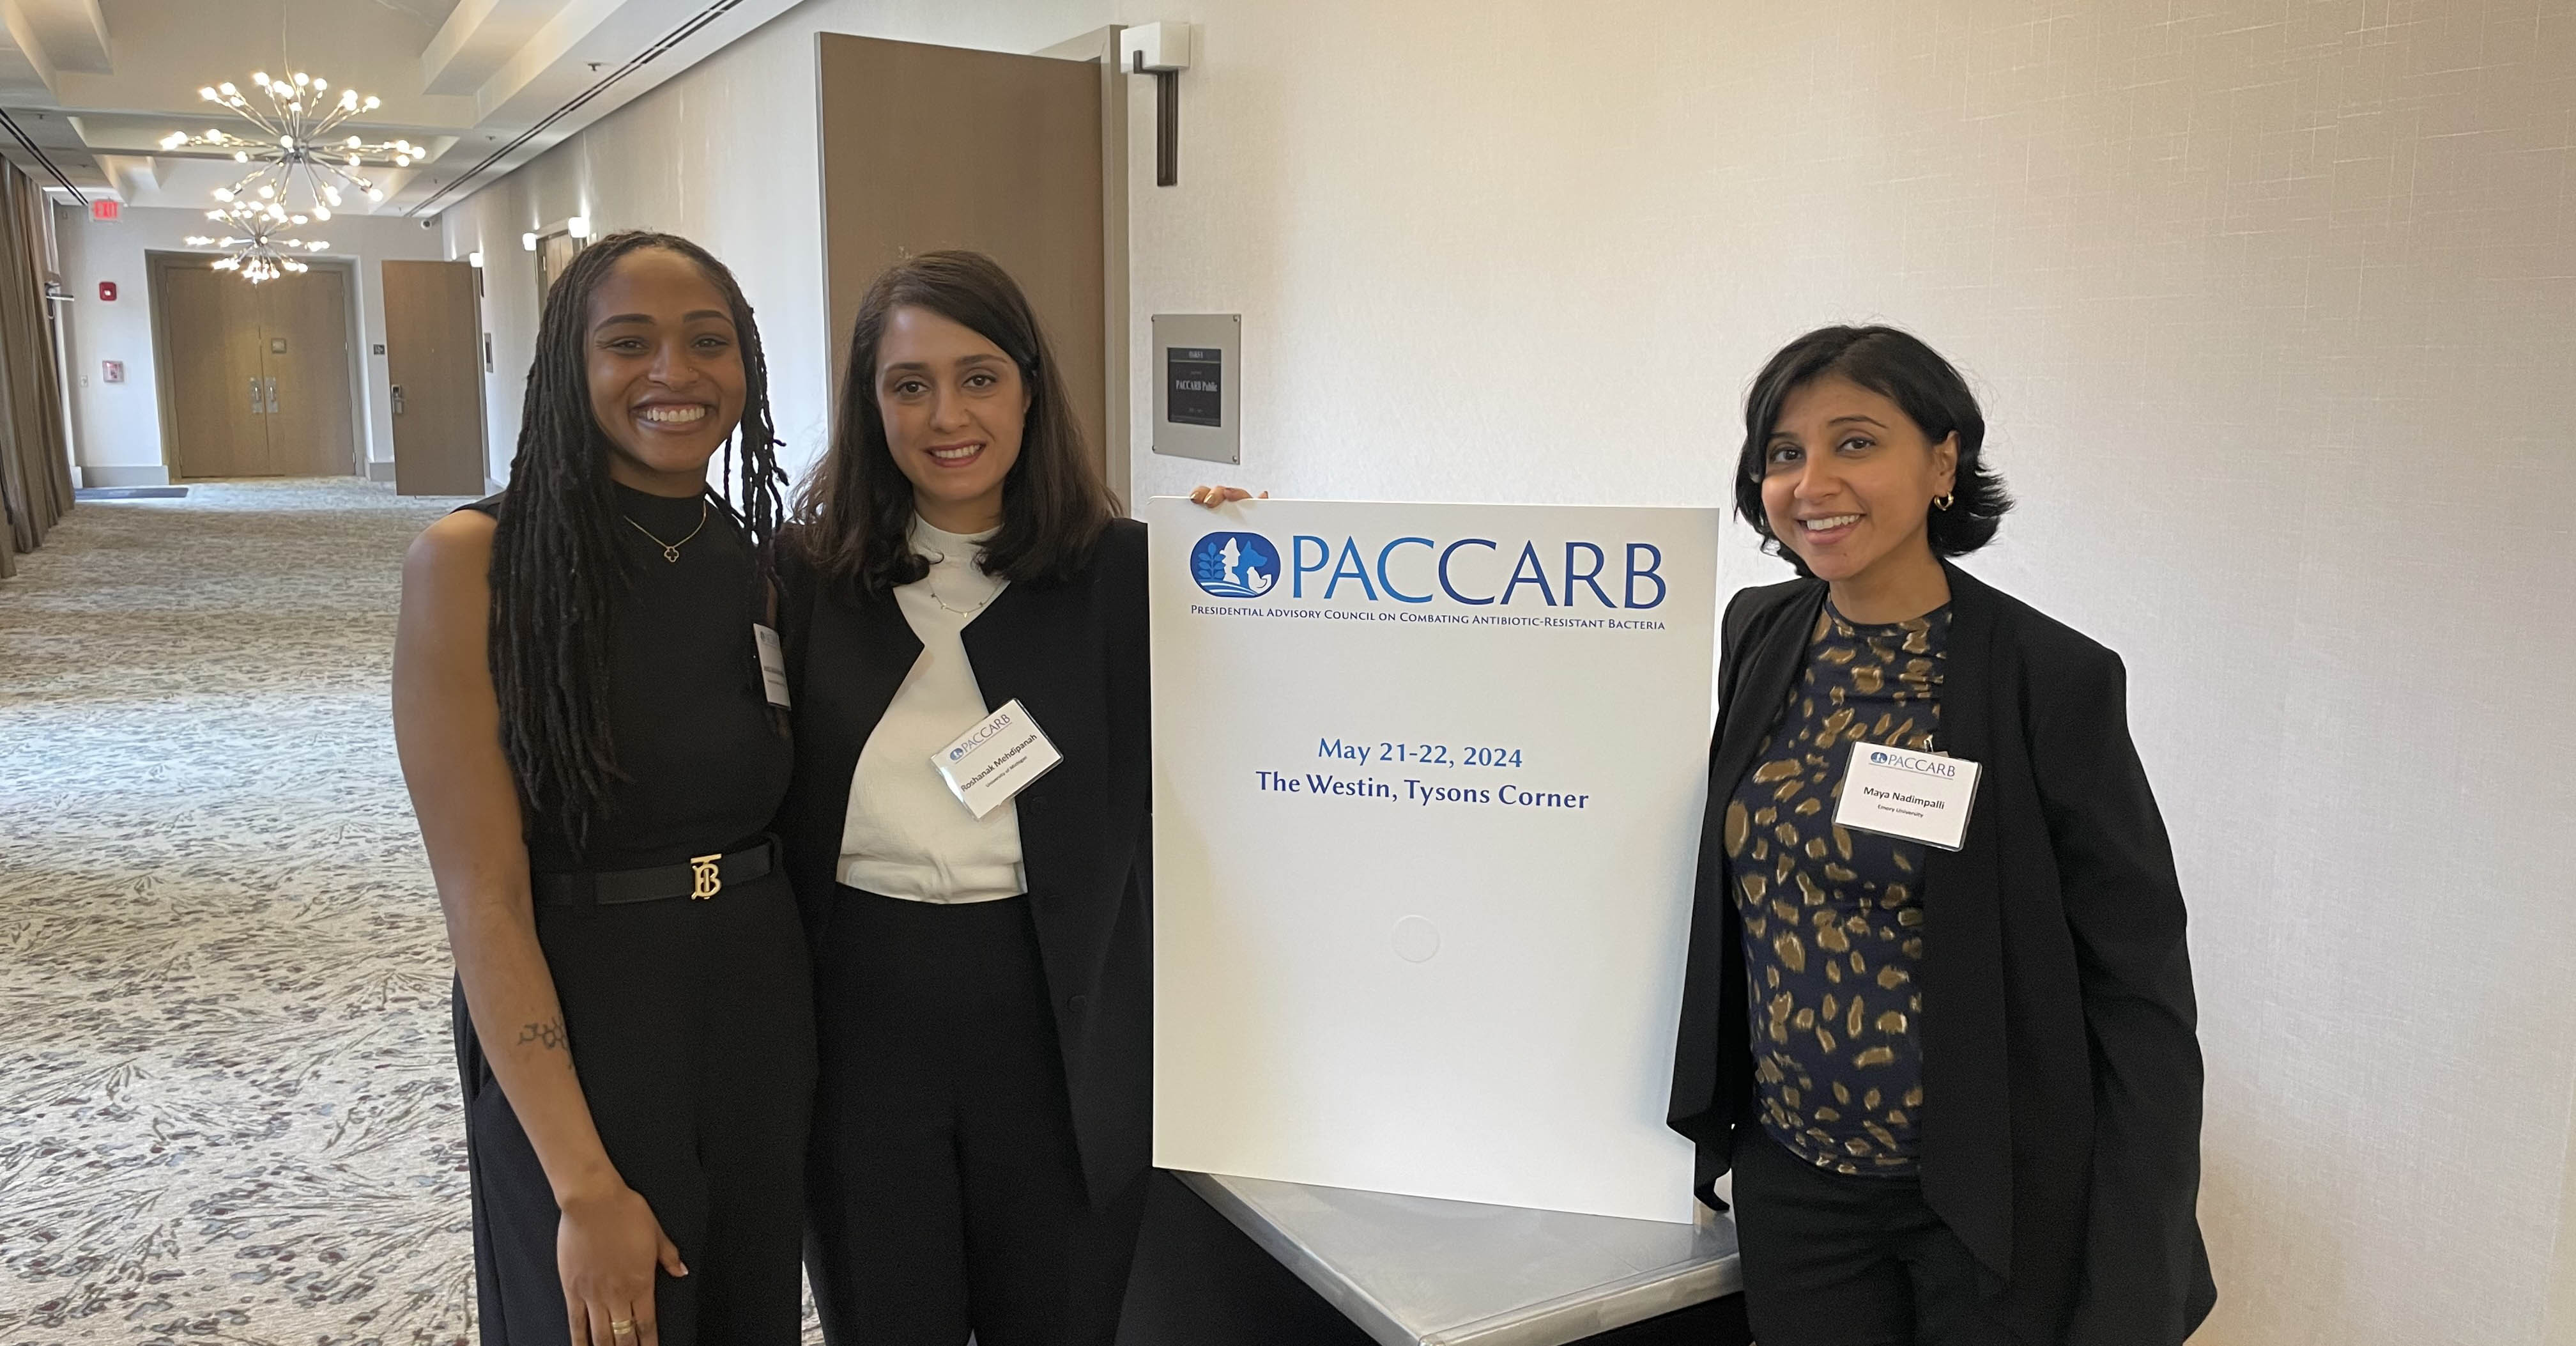 Roshanak Mehdipanah attends Presidential Advisory Council on Combating Antibiotic-Resistant Bacteria meeting in Washington, D.C.